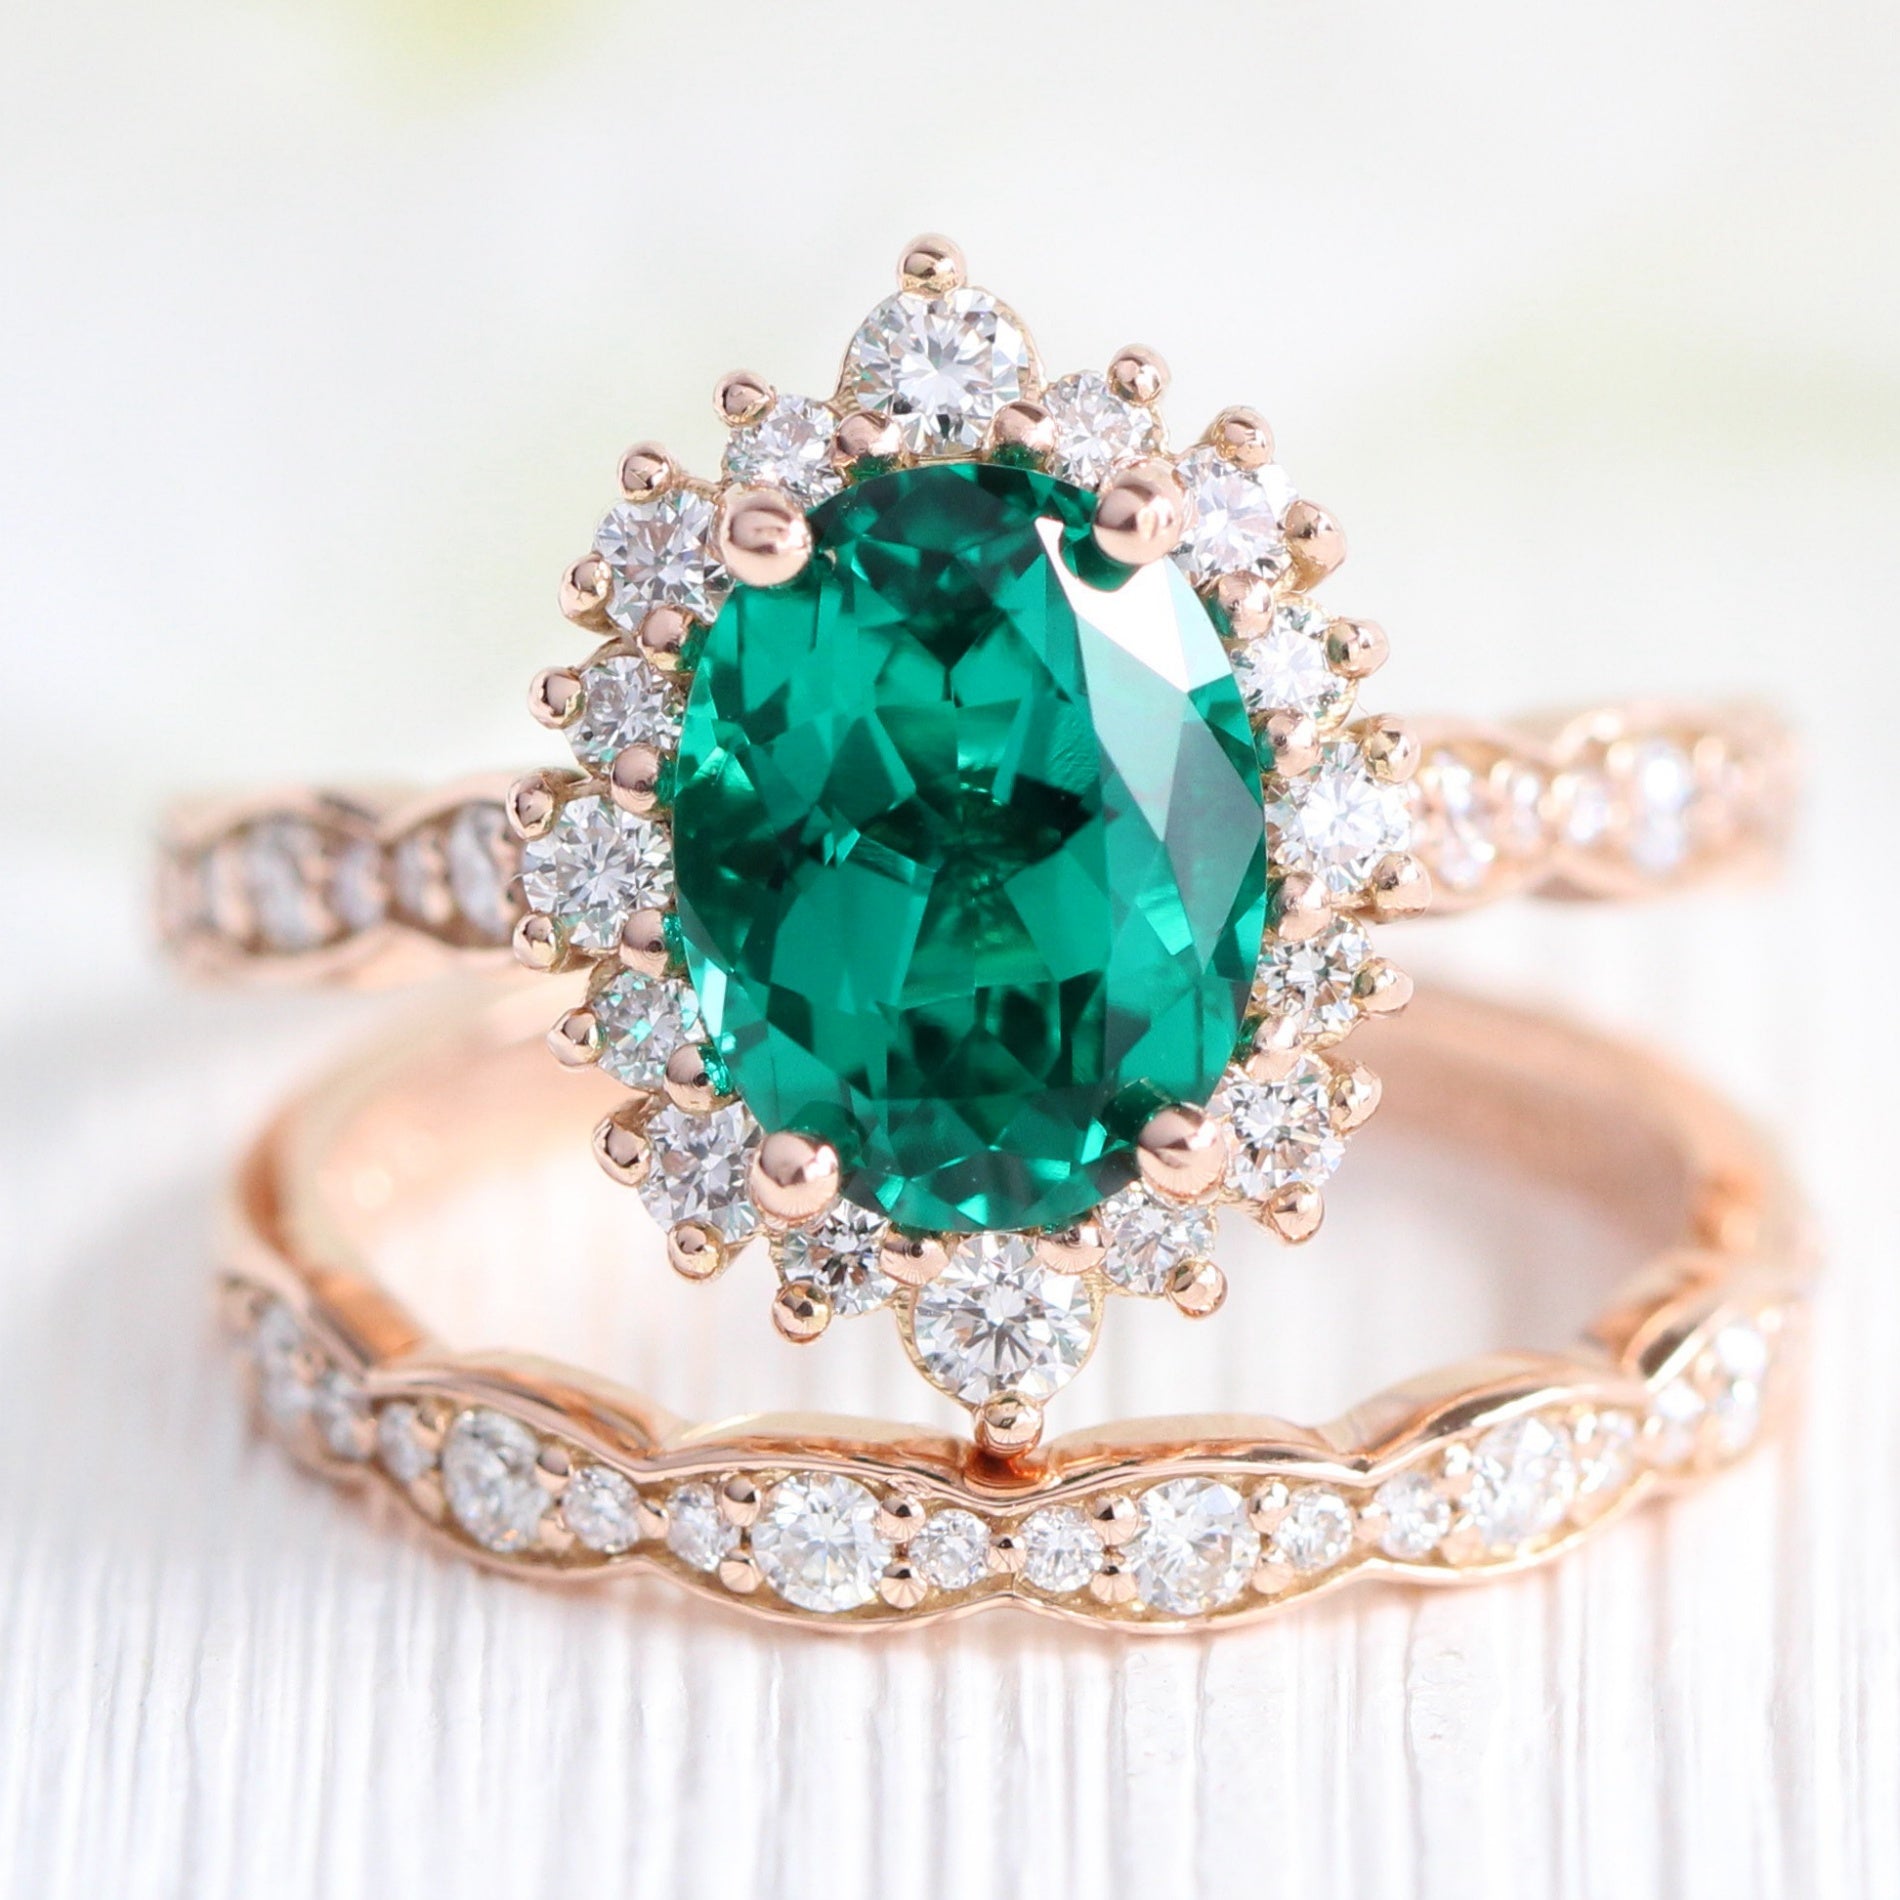 925 Sterling Silver Green Oval Zircon Lab Emerald Ring For Women Real  Gemstone Engagement & Emerald Green Wedding Ring Gift From Xvwed, $20.21 |  DHgate.Com